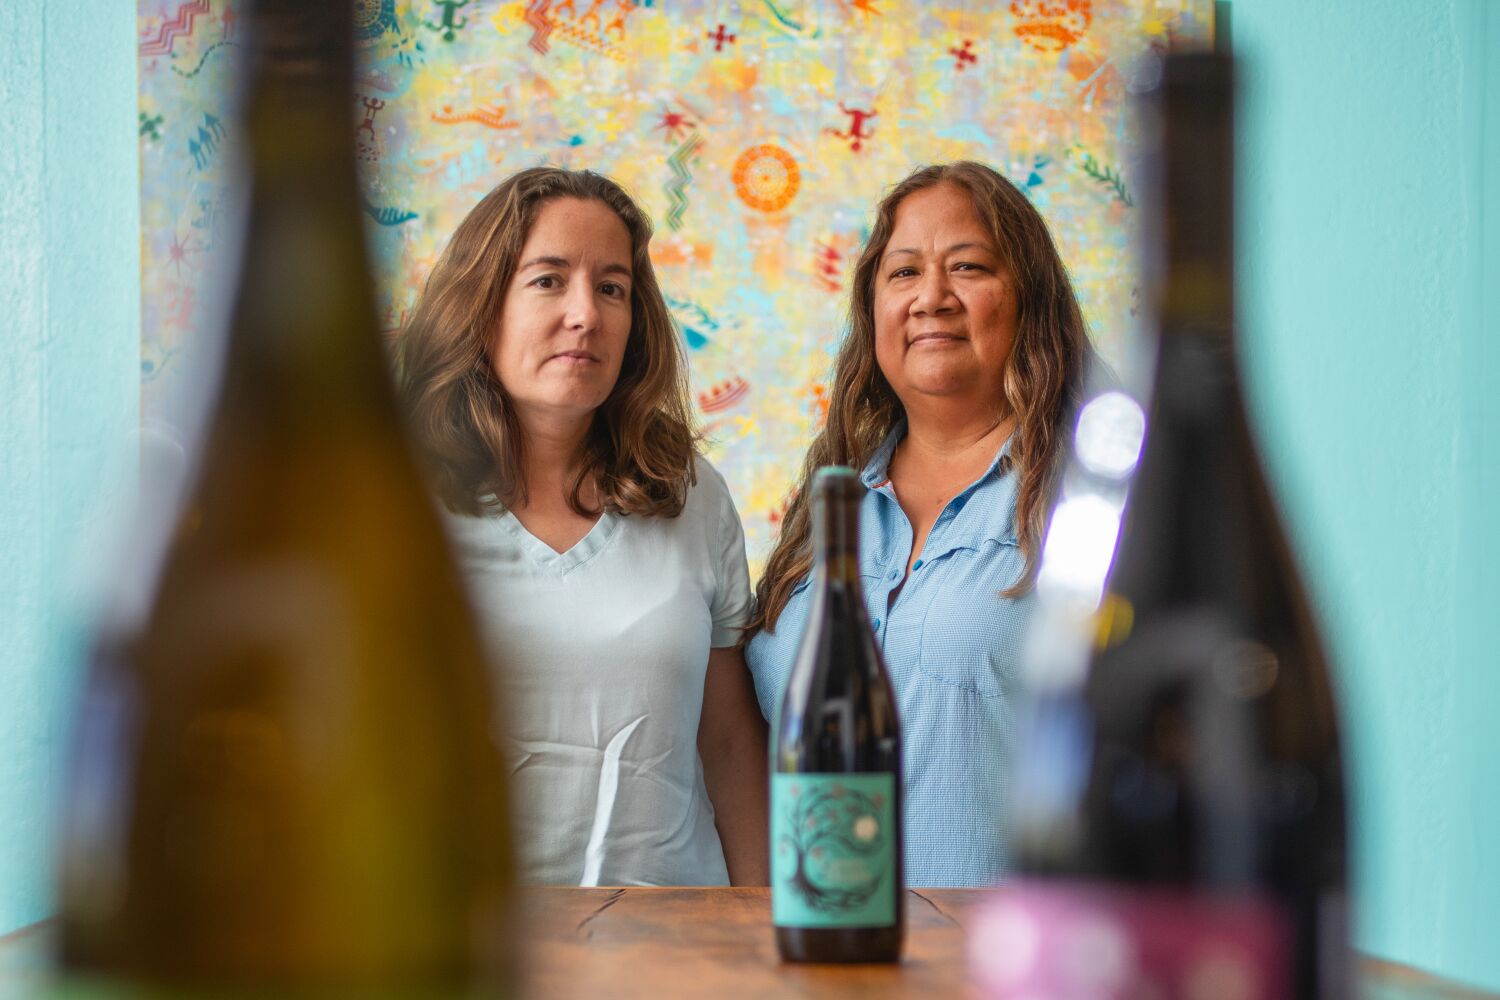 Indigenous and immigrant queer couple make 'underrepresented wine by underrepresented people'